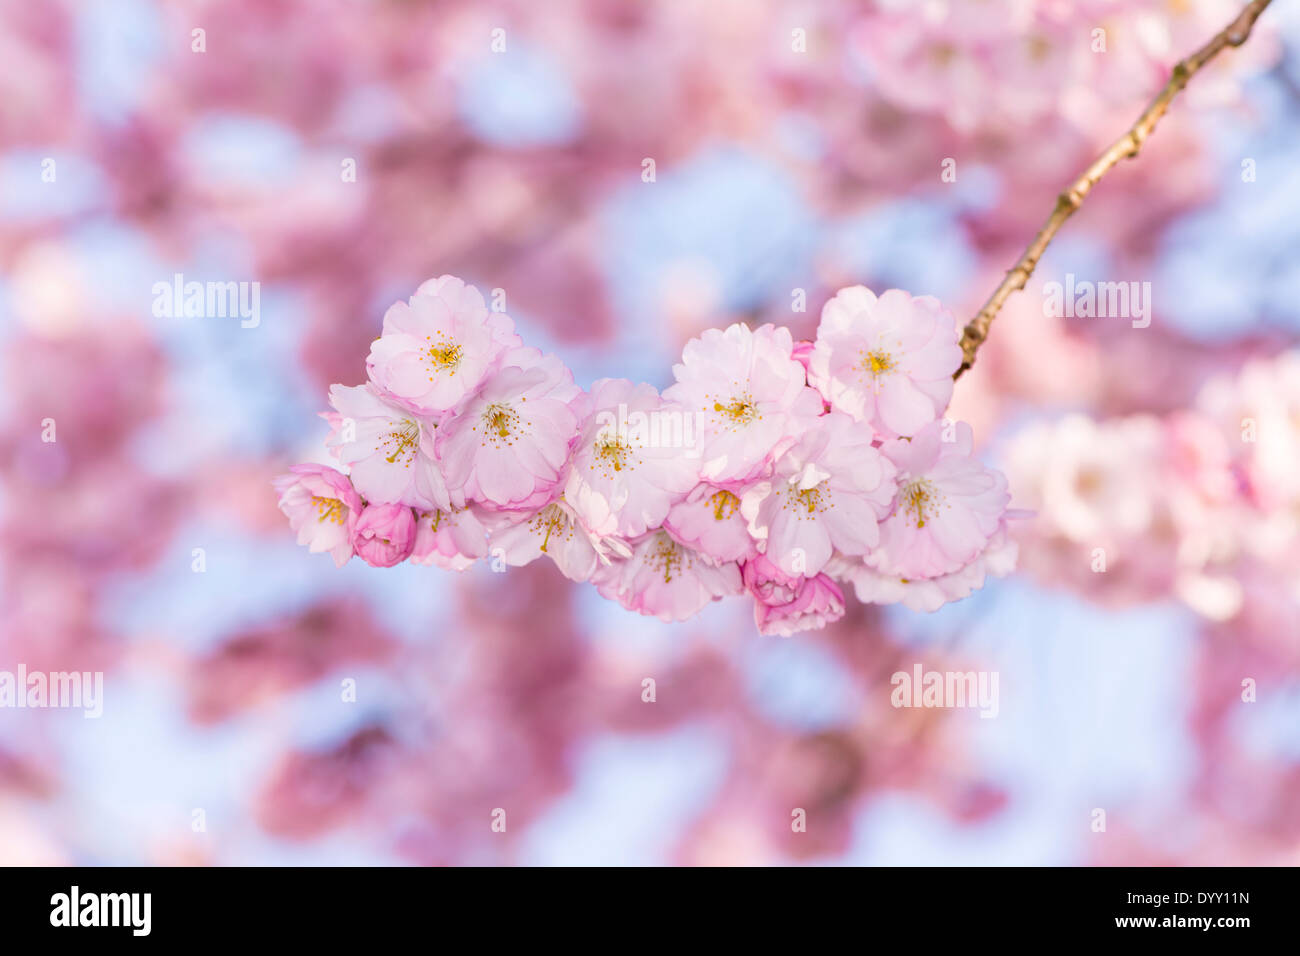 Spring scenic - twig with pink cherry blossoms Stock Photo